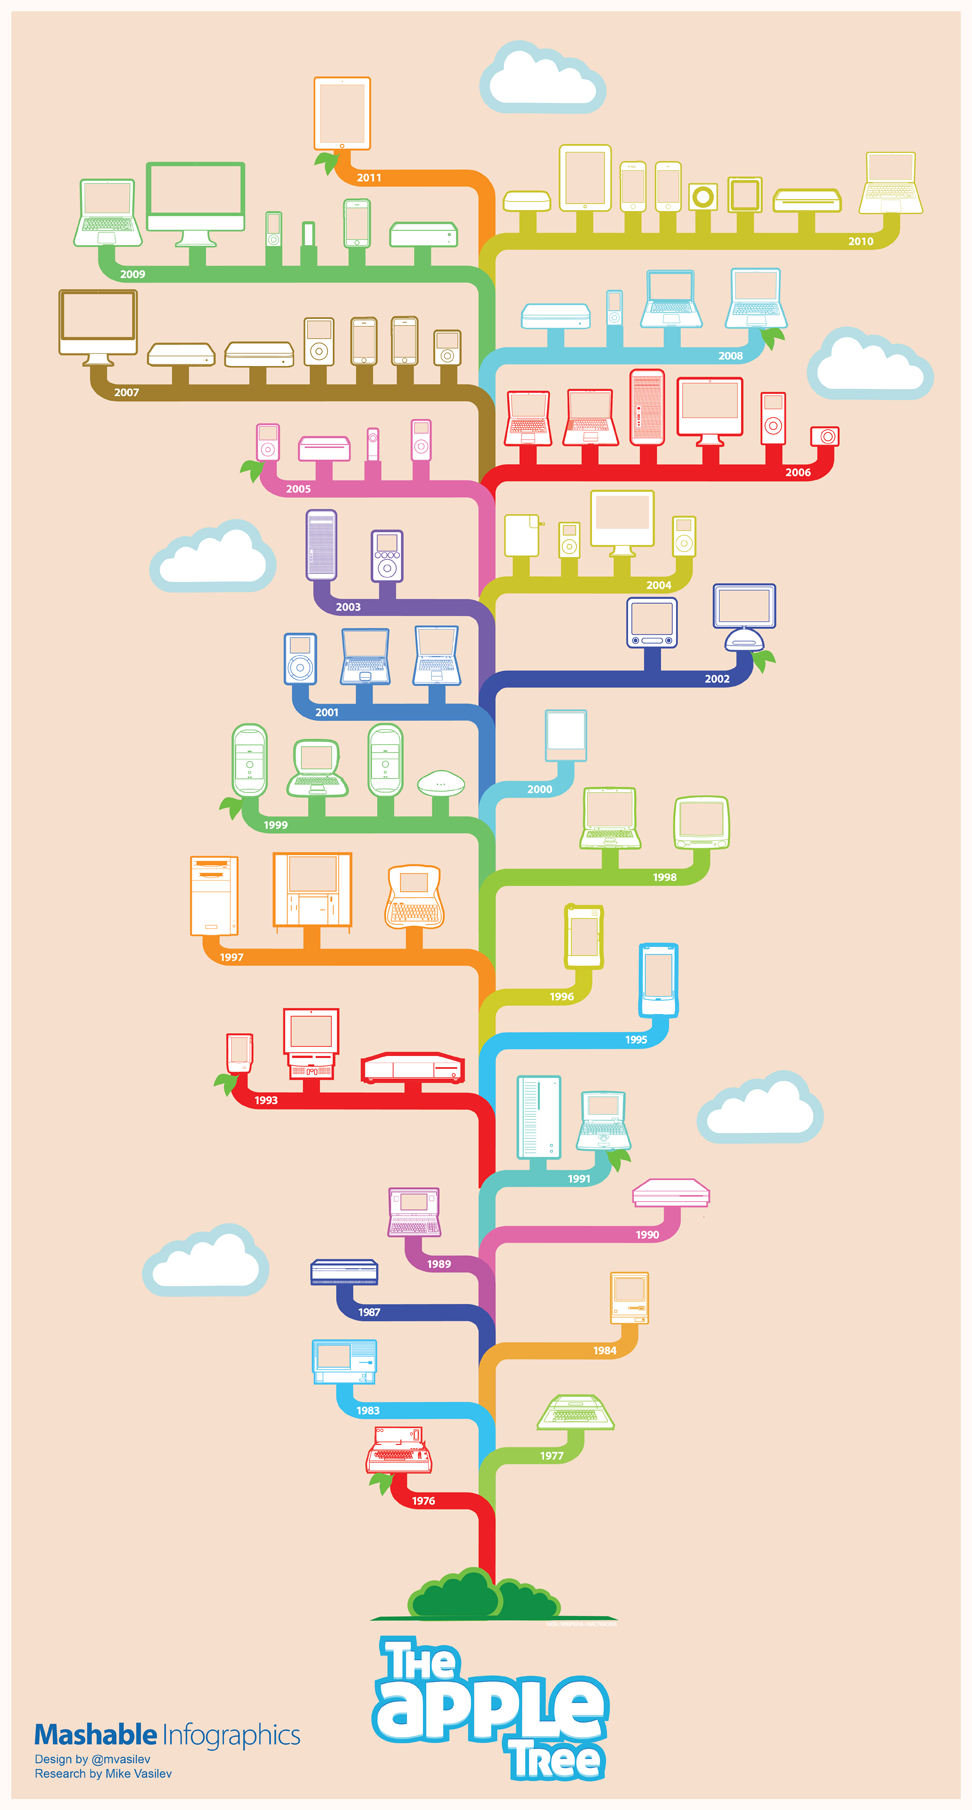 The Apple Product Design Tree [Infographic]